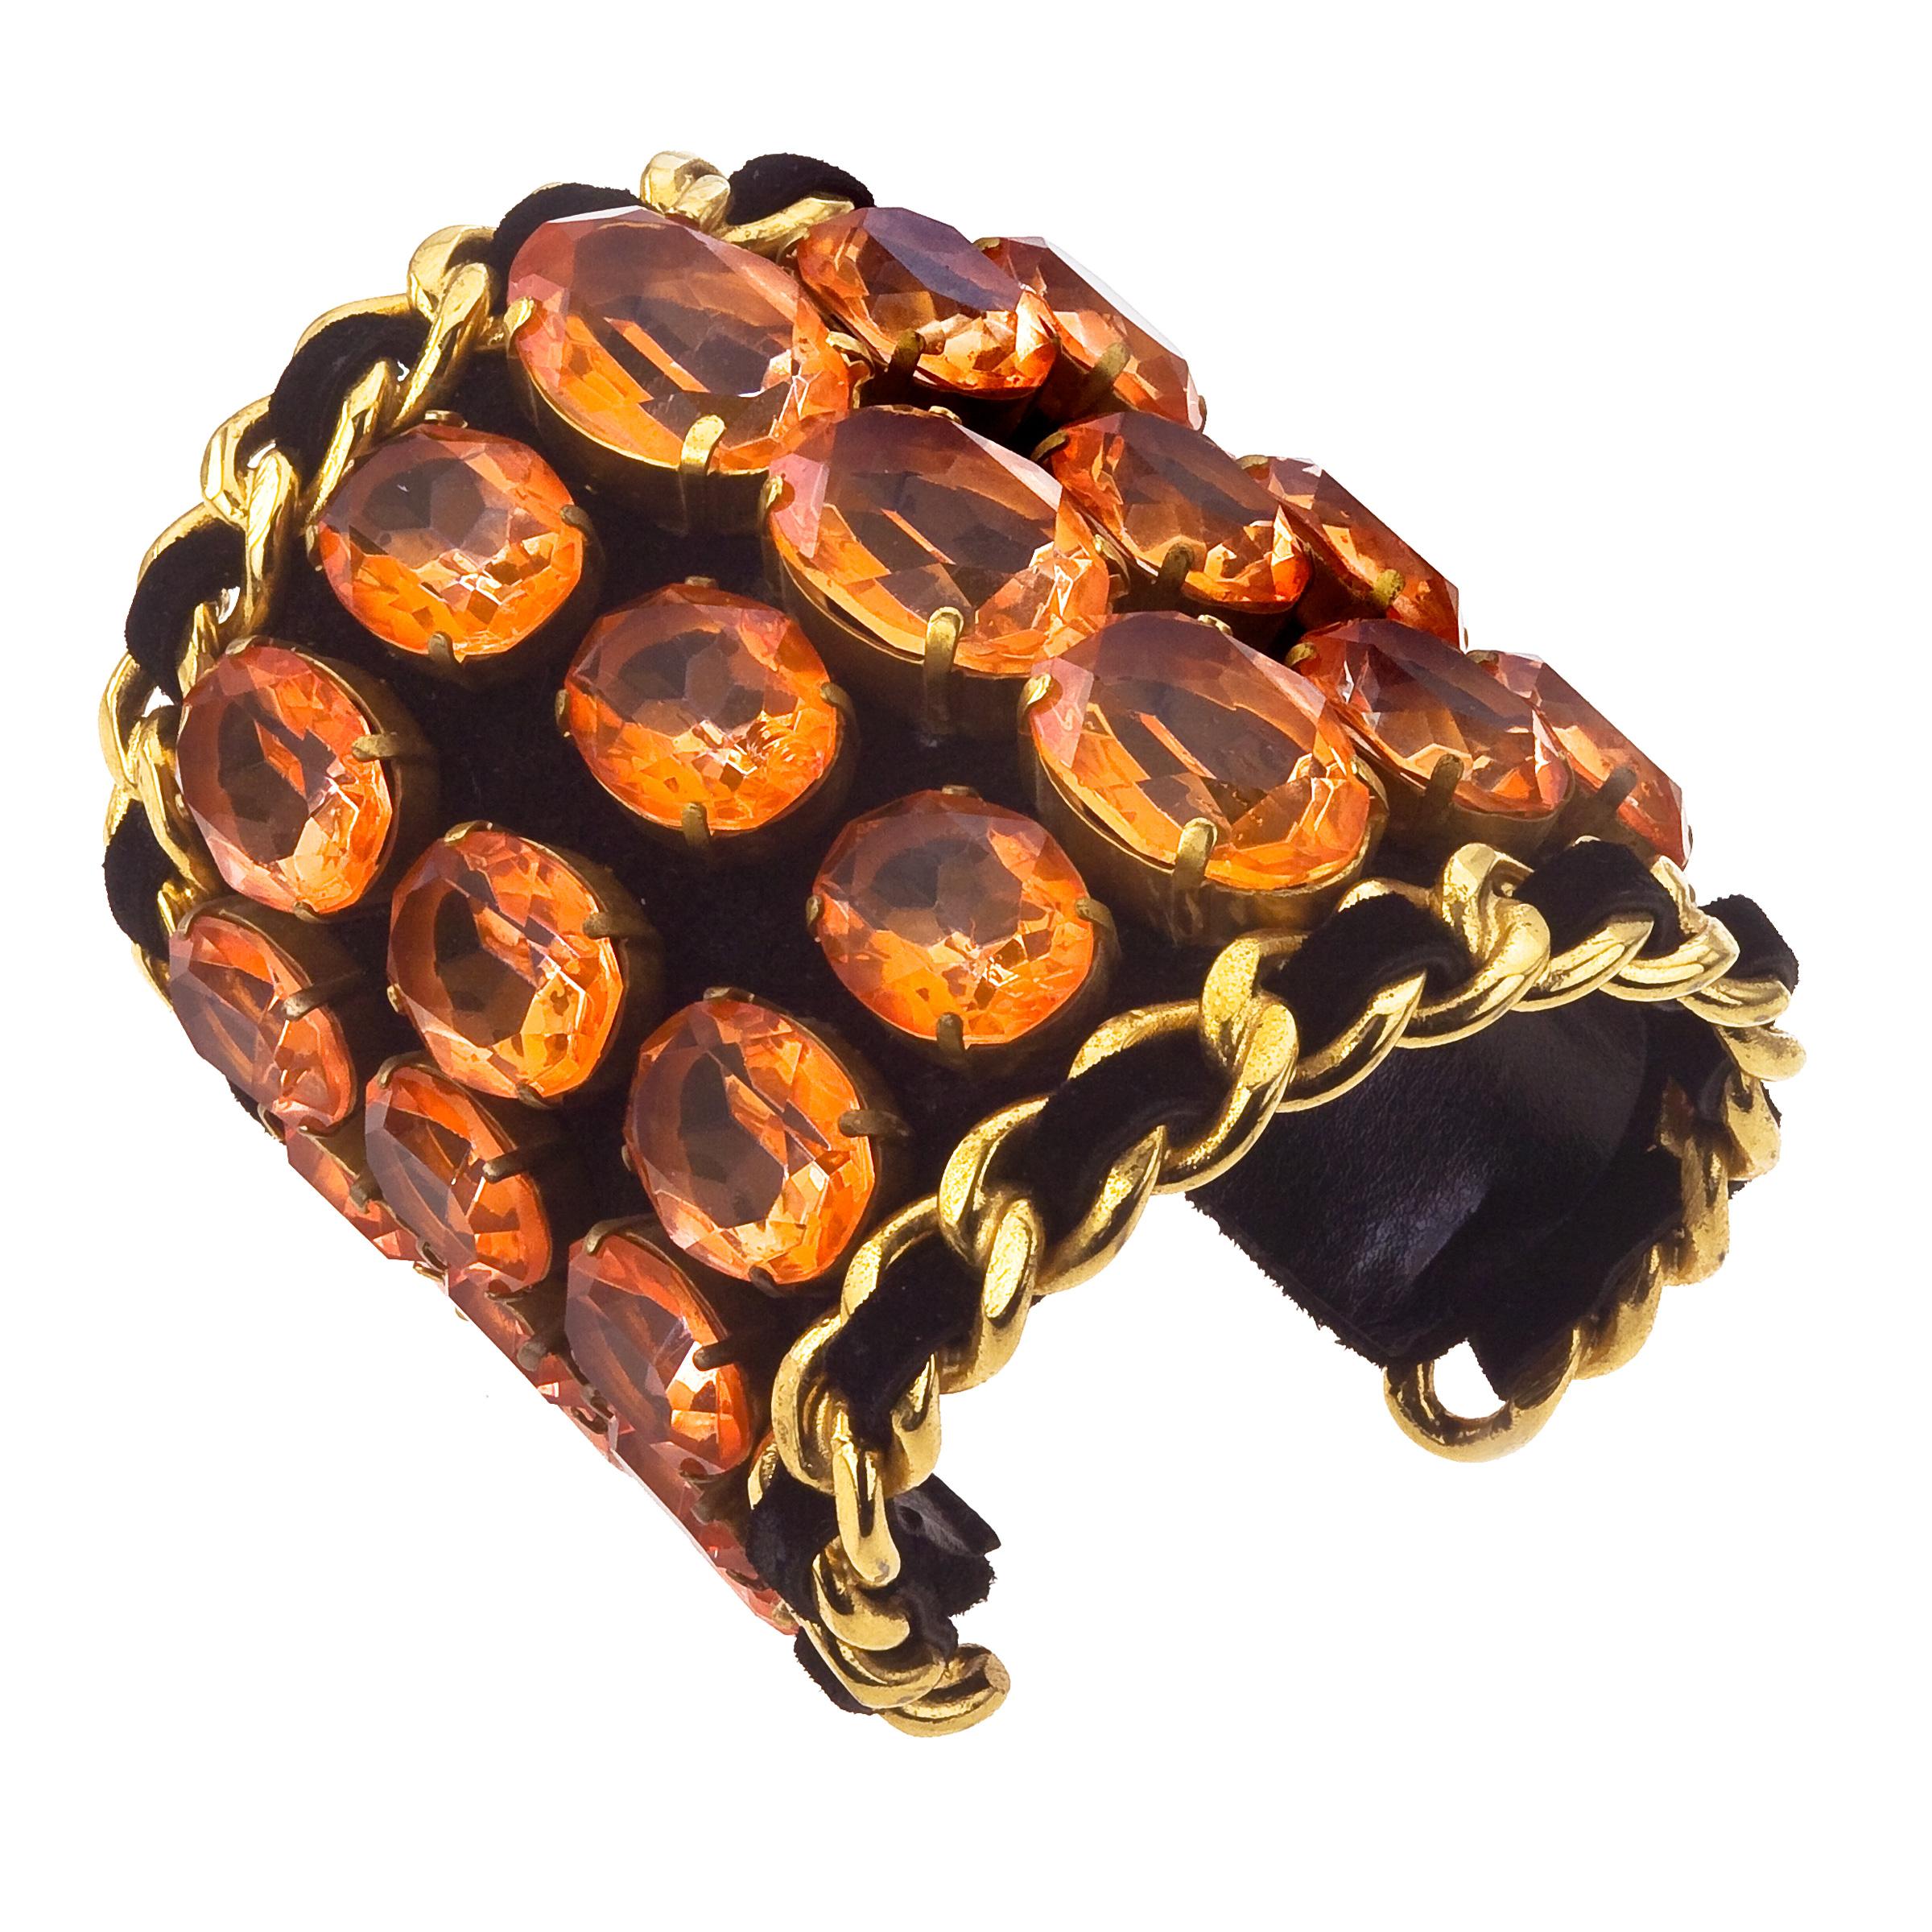 Extremely rare vintage Chanel bangle from Karl Lagerfeld era. It has large orange crystals all around. 